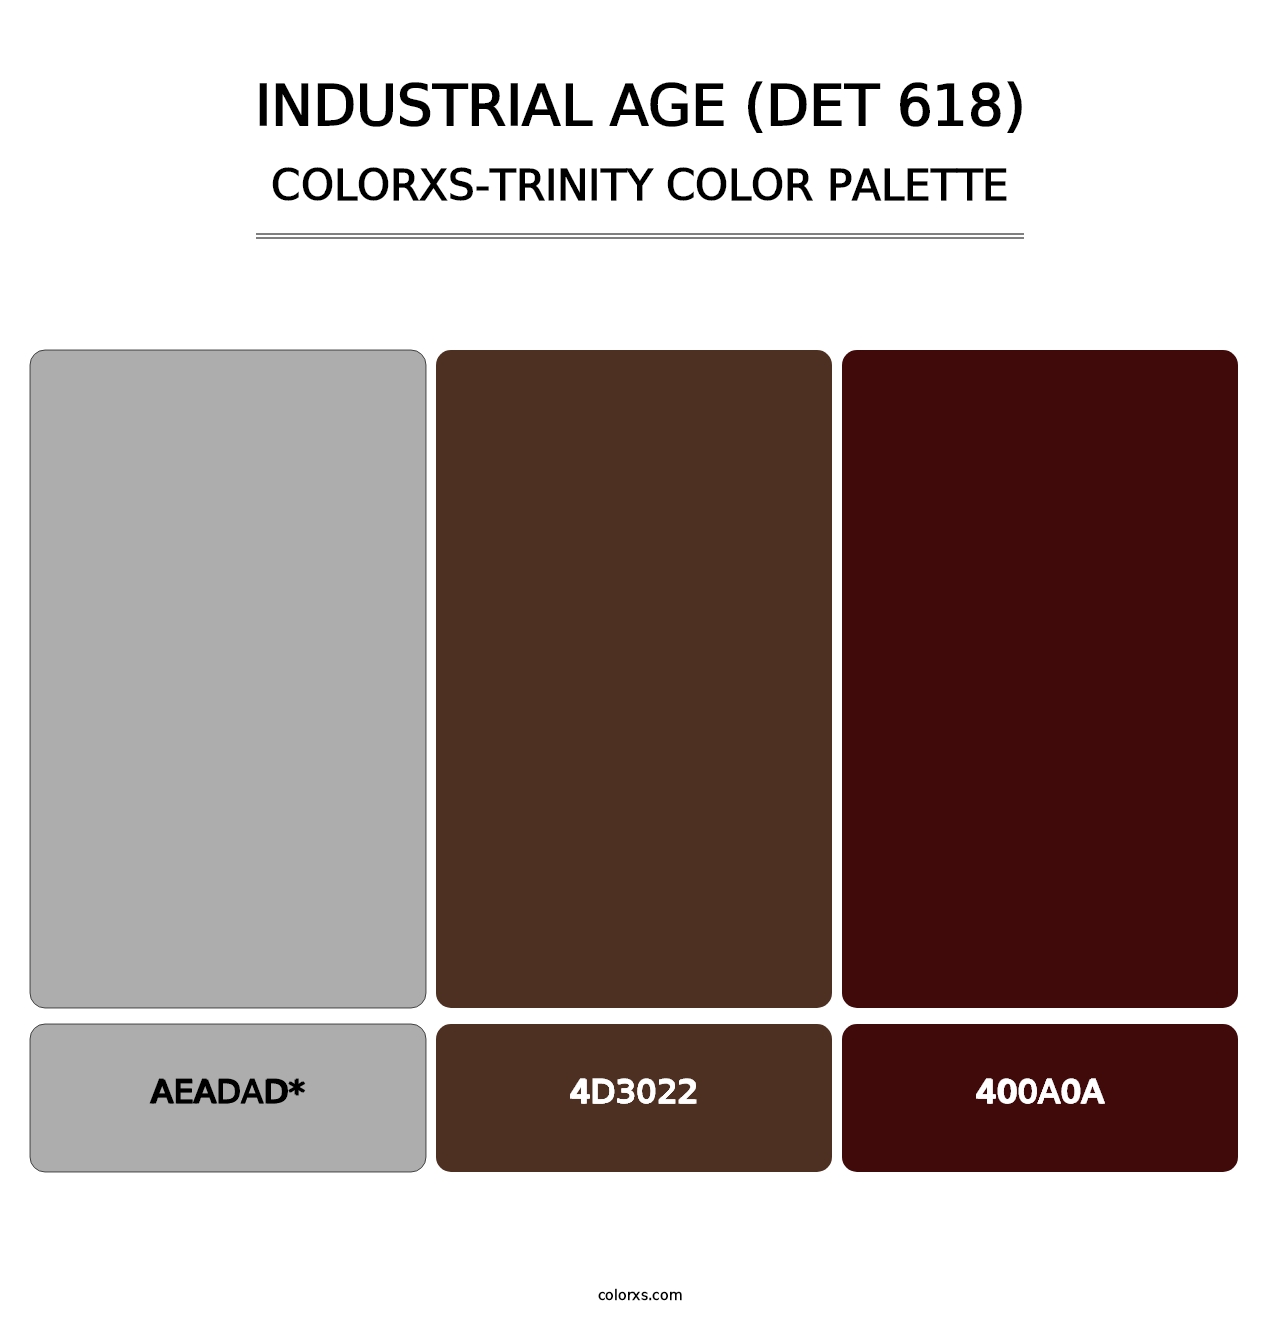 Industrial Age (DET 618) - Colorxs Trinity Palette